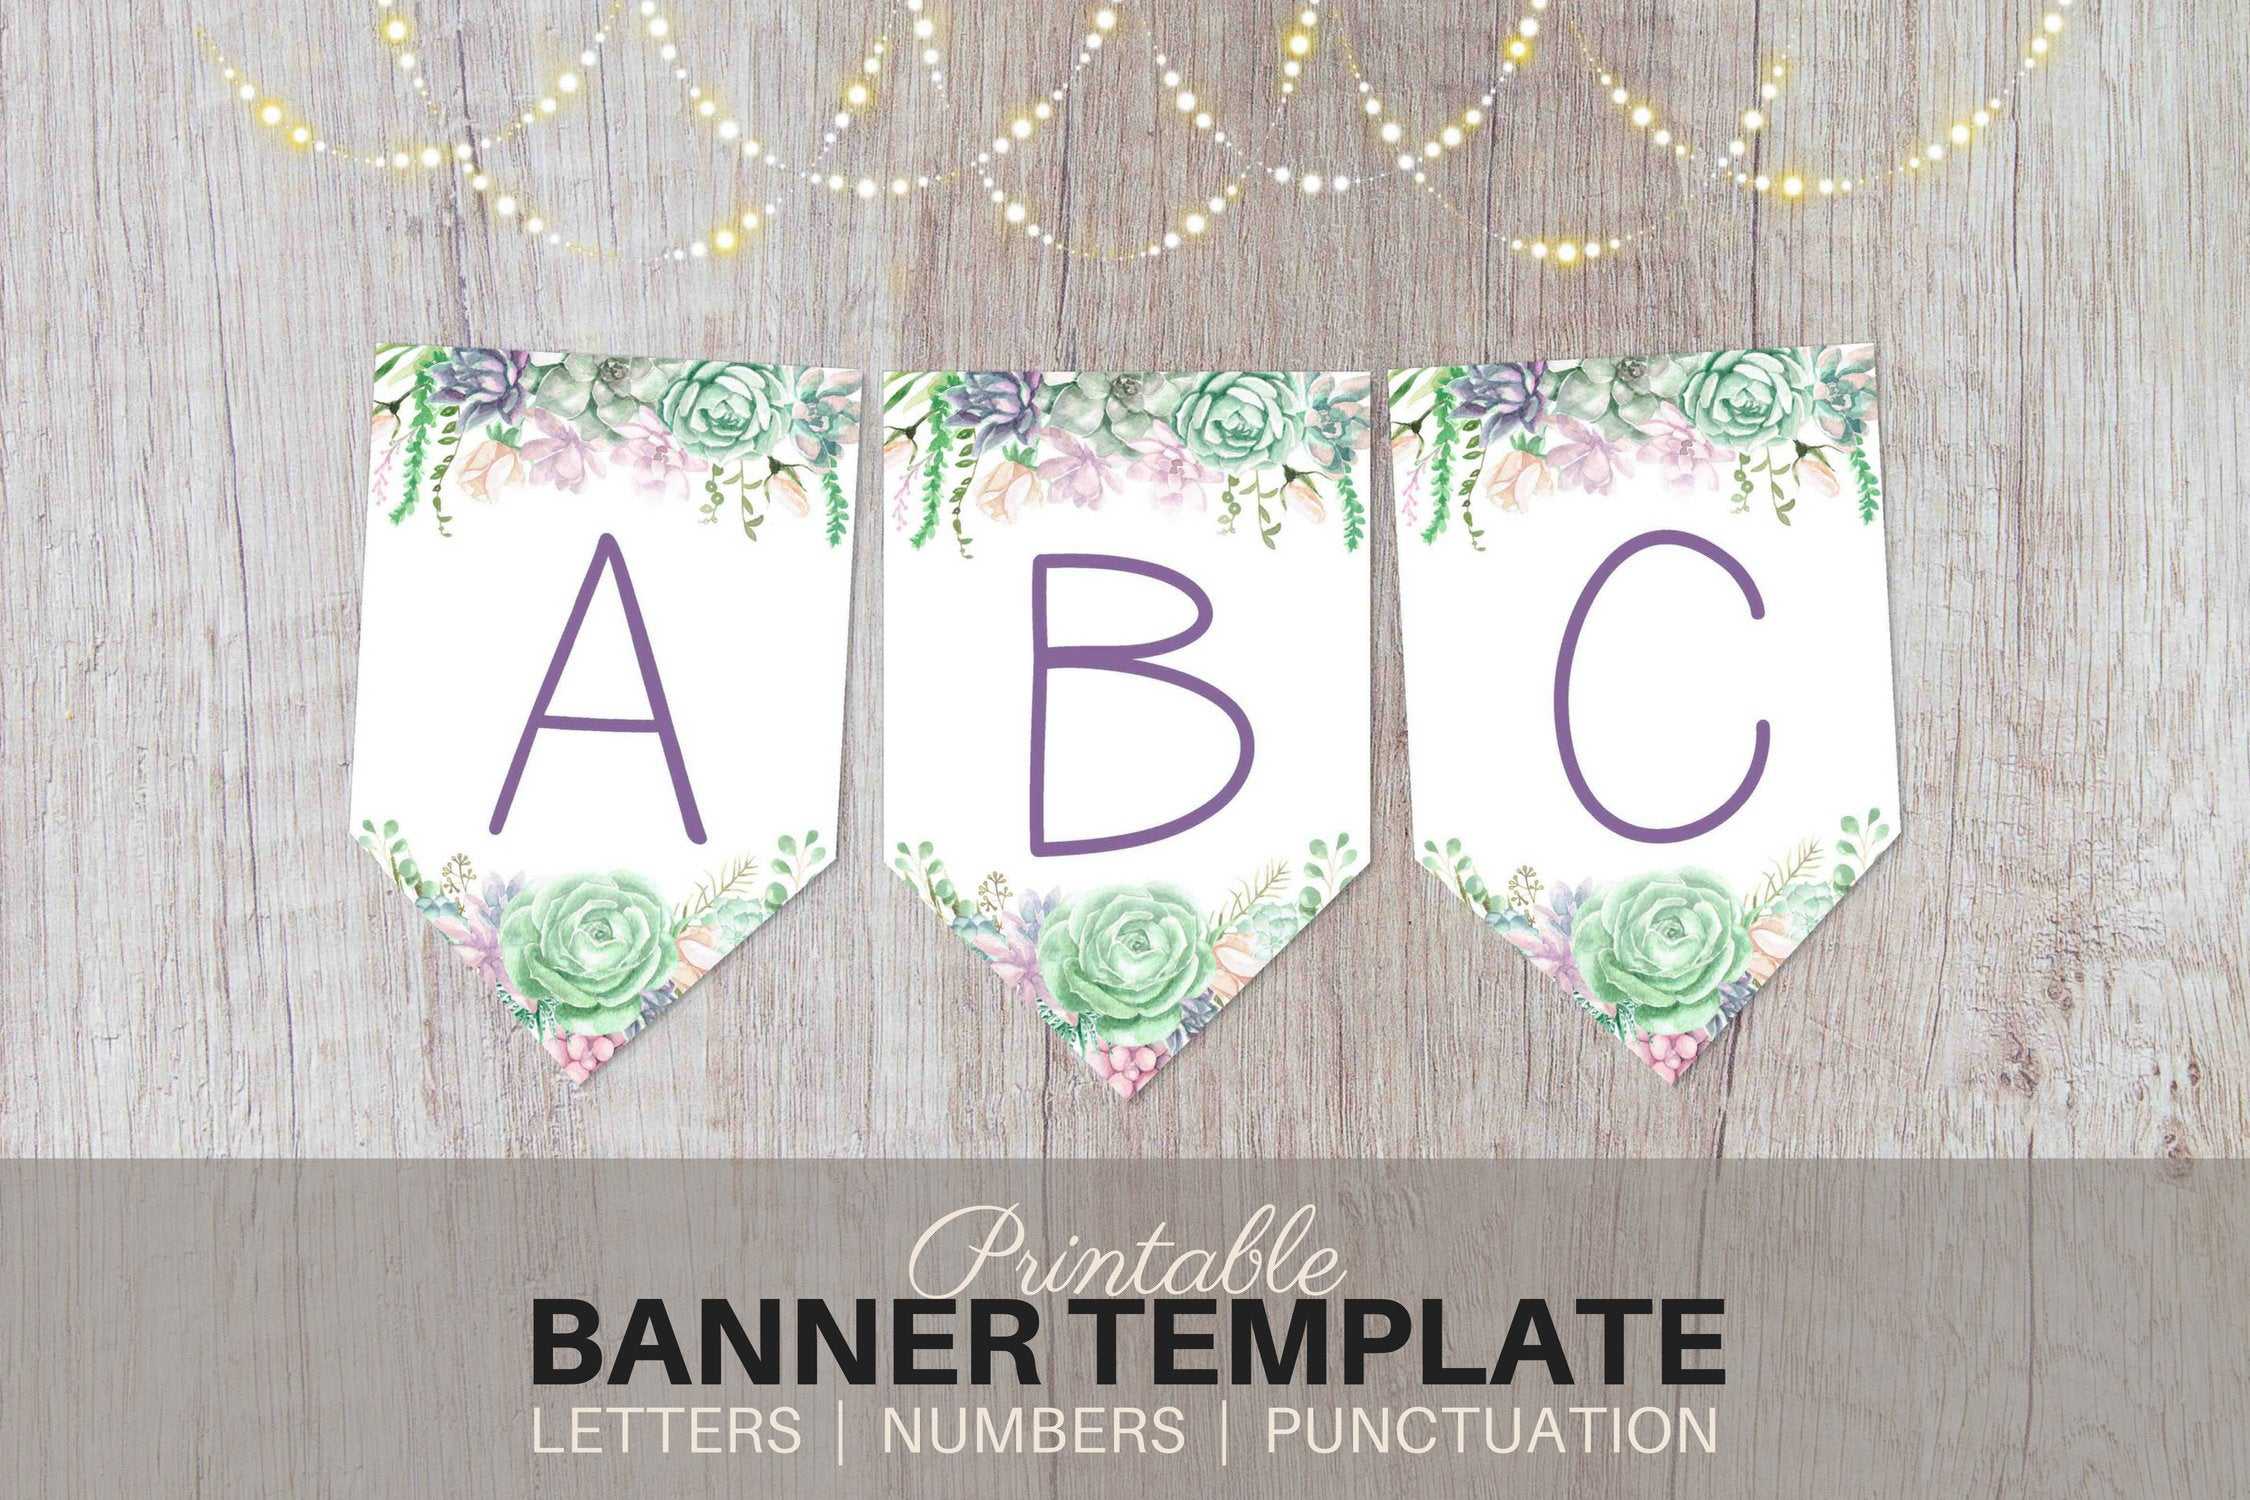 Printable Banner Template – Watercolor Succulents – Editable Printable  Banner Letters Pdf Bridal Shower, Birthday, Baby Shower, Party Banner Inside Bridal Shower Banner Template